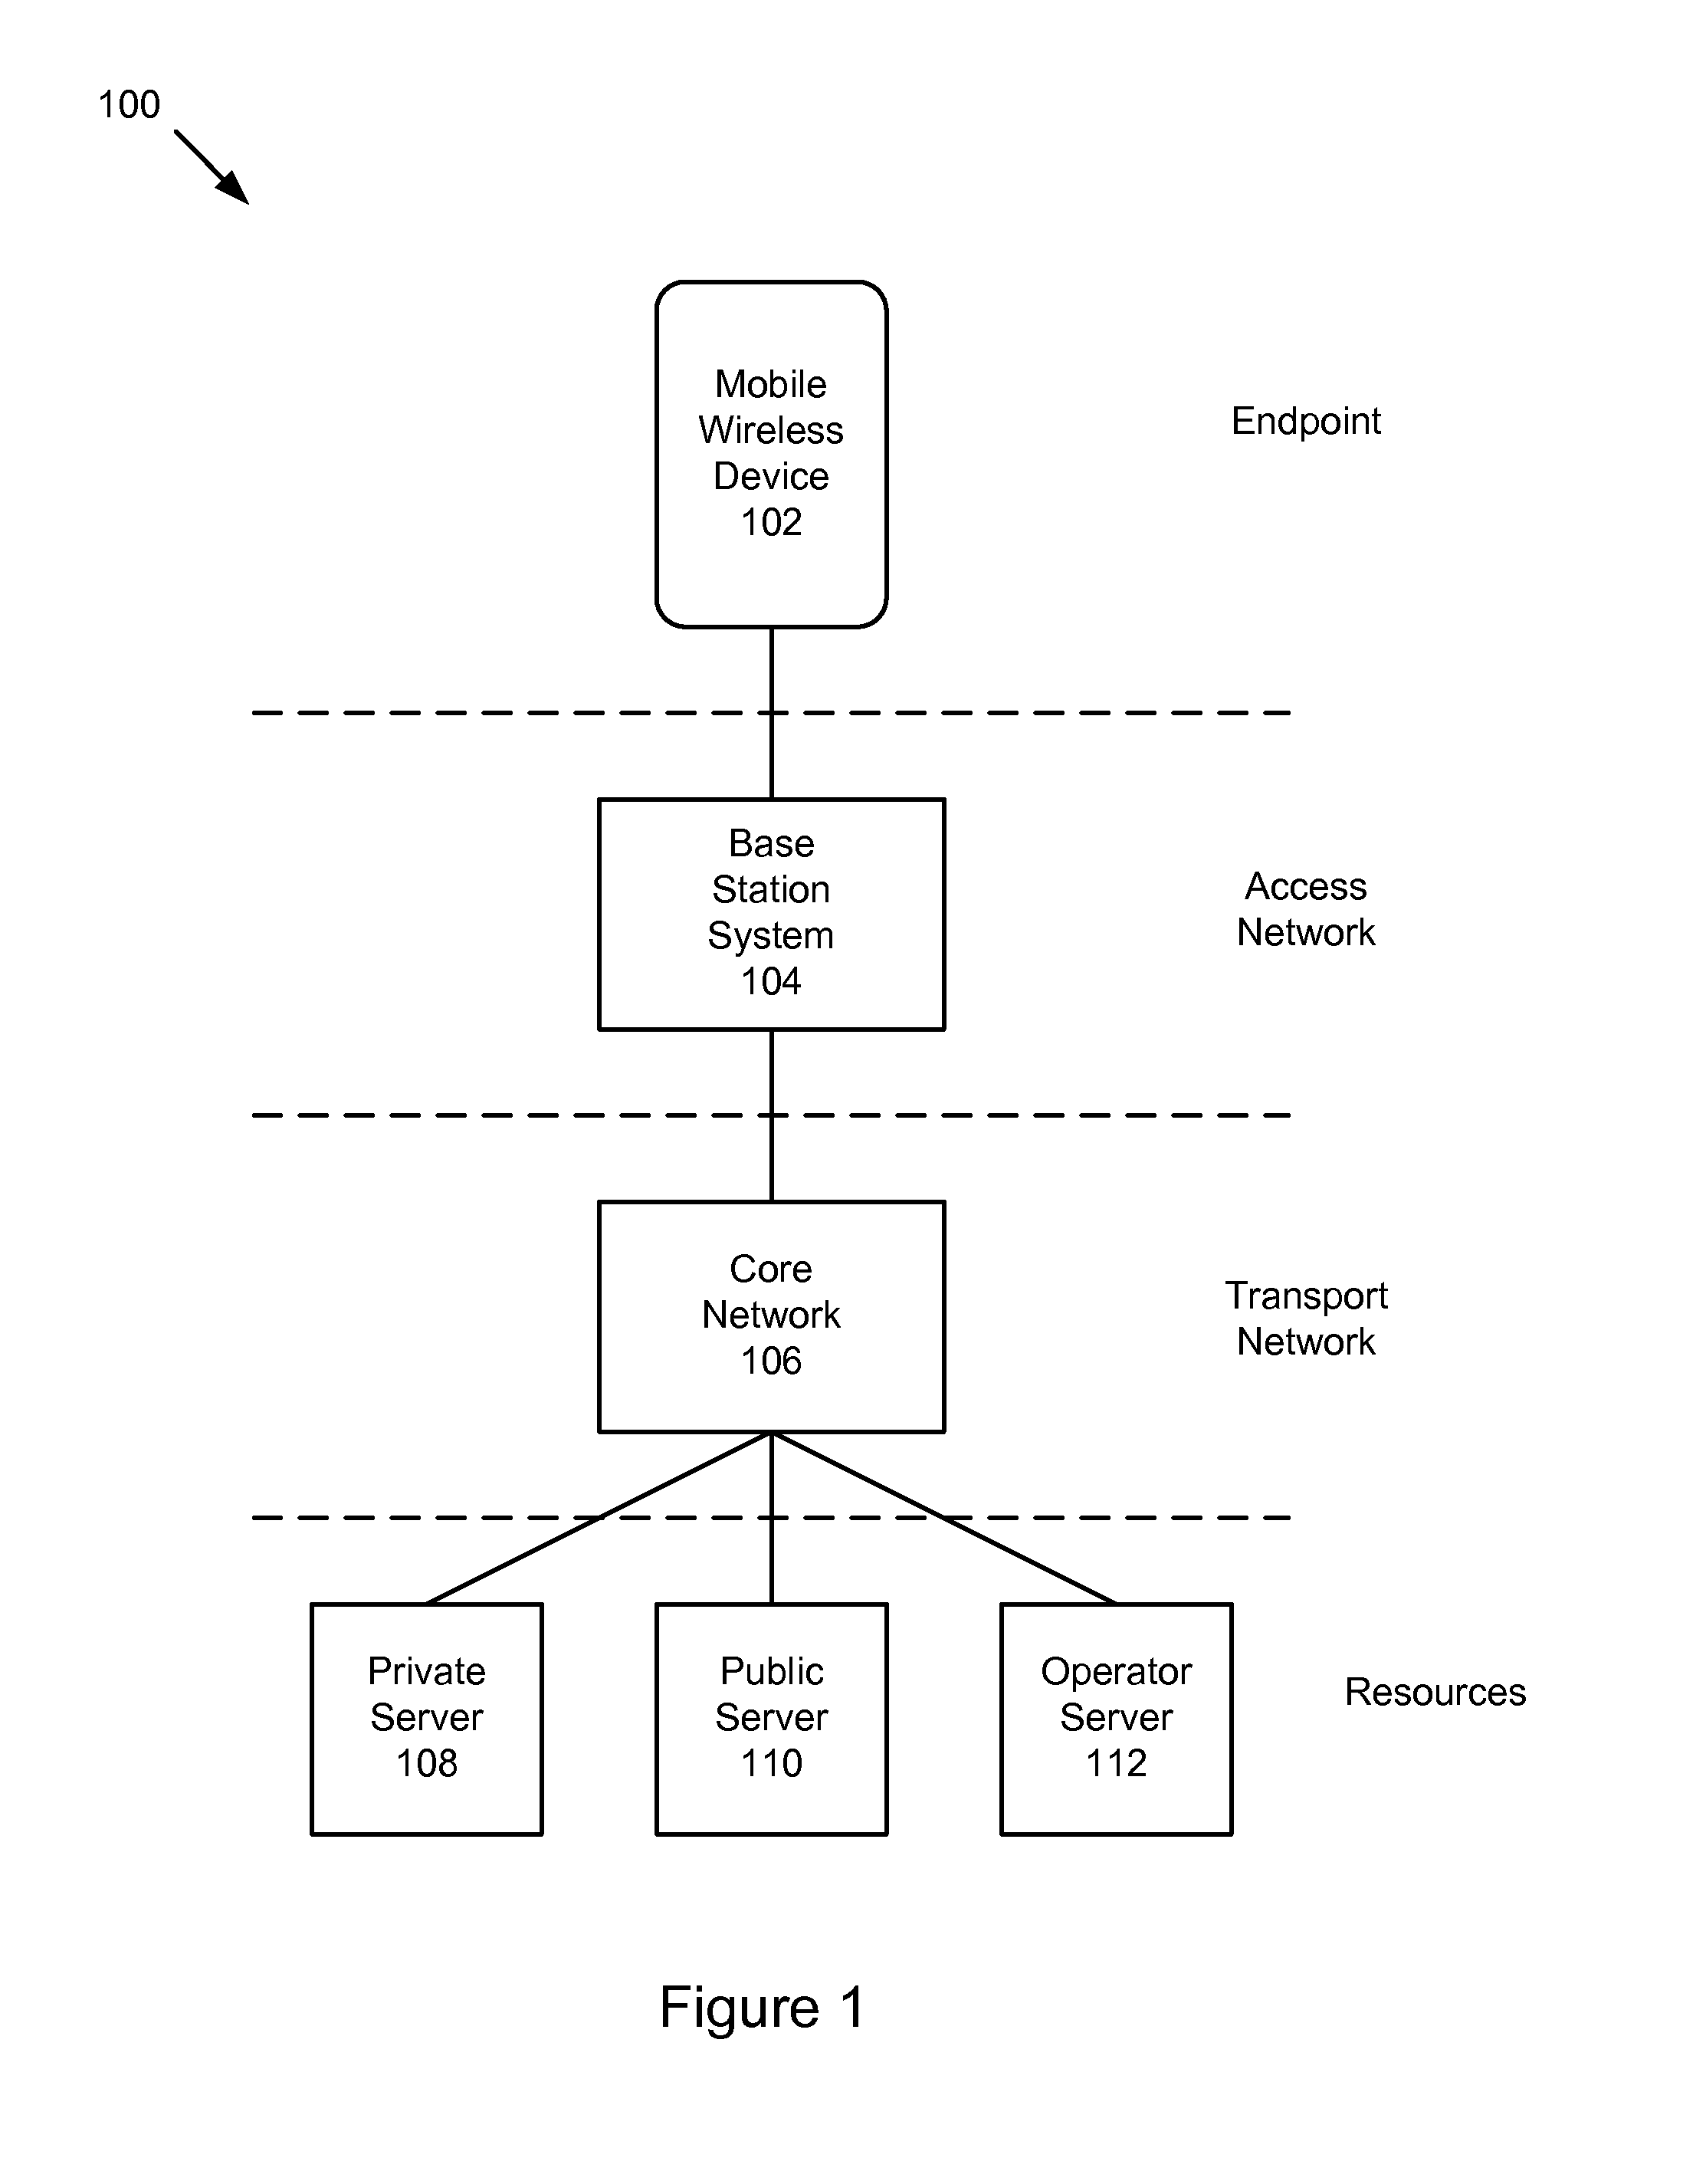 Adaptive timers for polling in a mobile wireless device